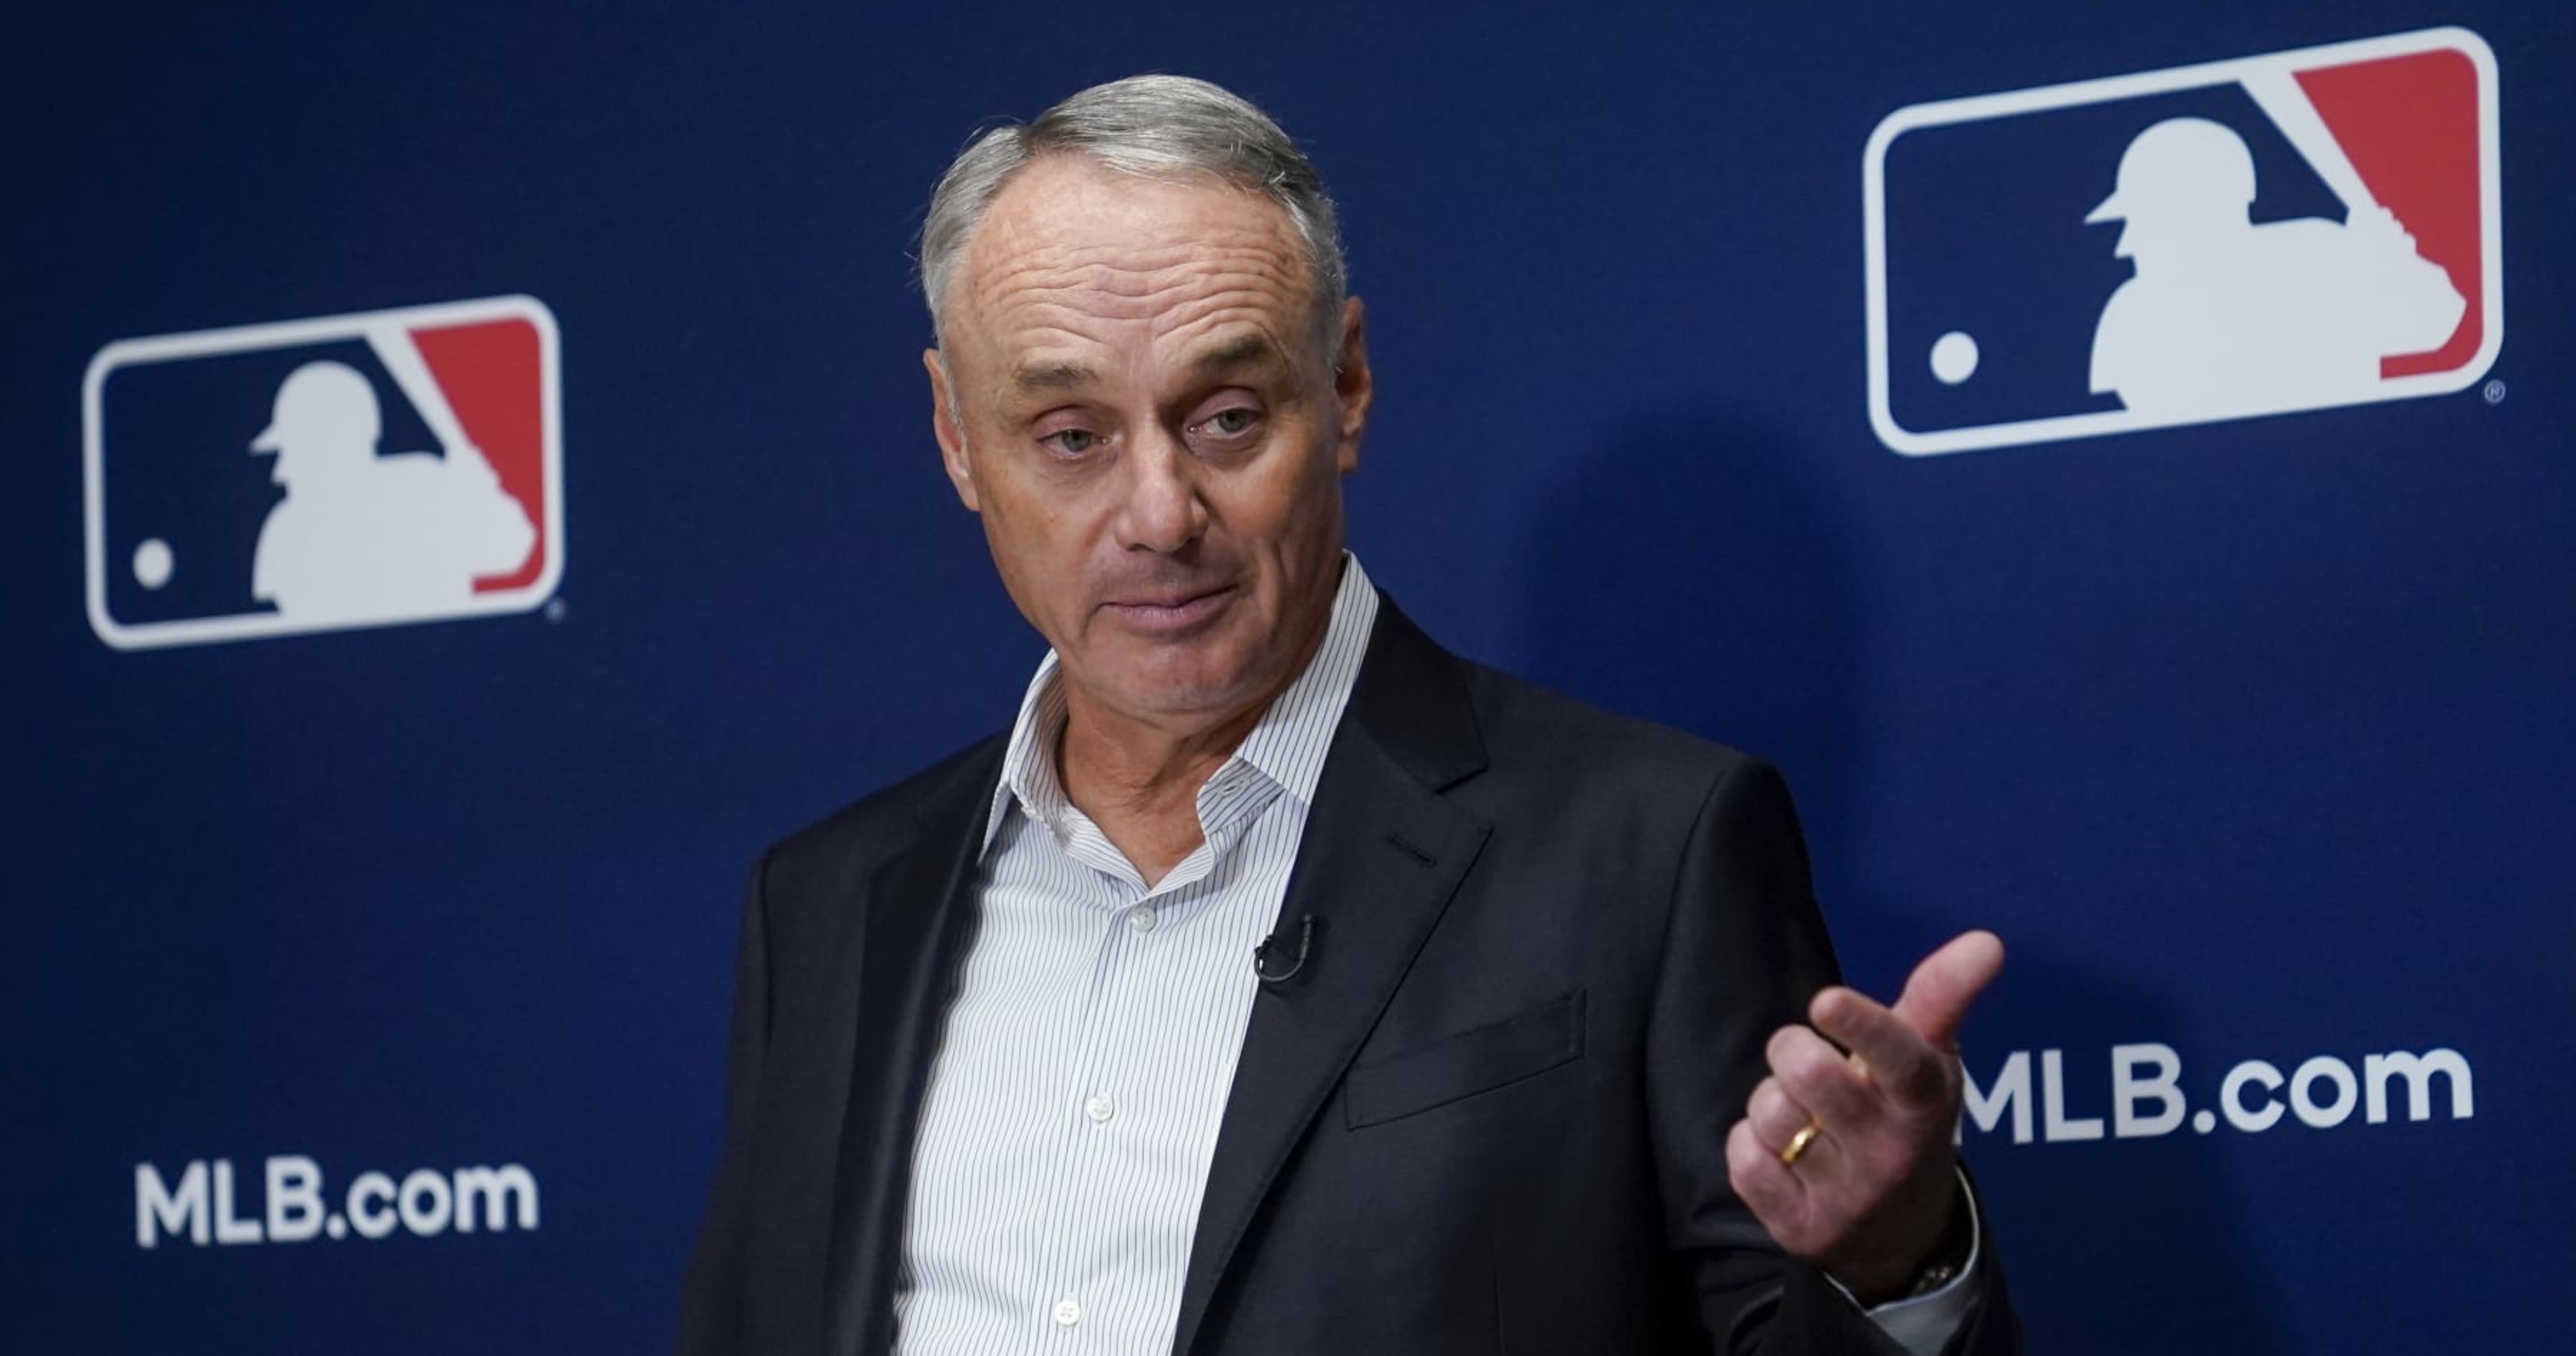 Report: Rob Manfred Expected to Be Re-Elected as MLB Commissioner for 3rd Term thumbnail